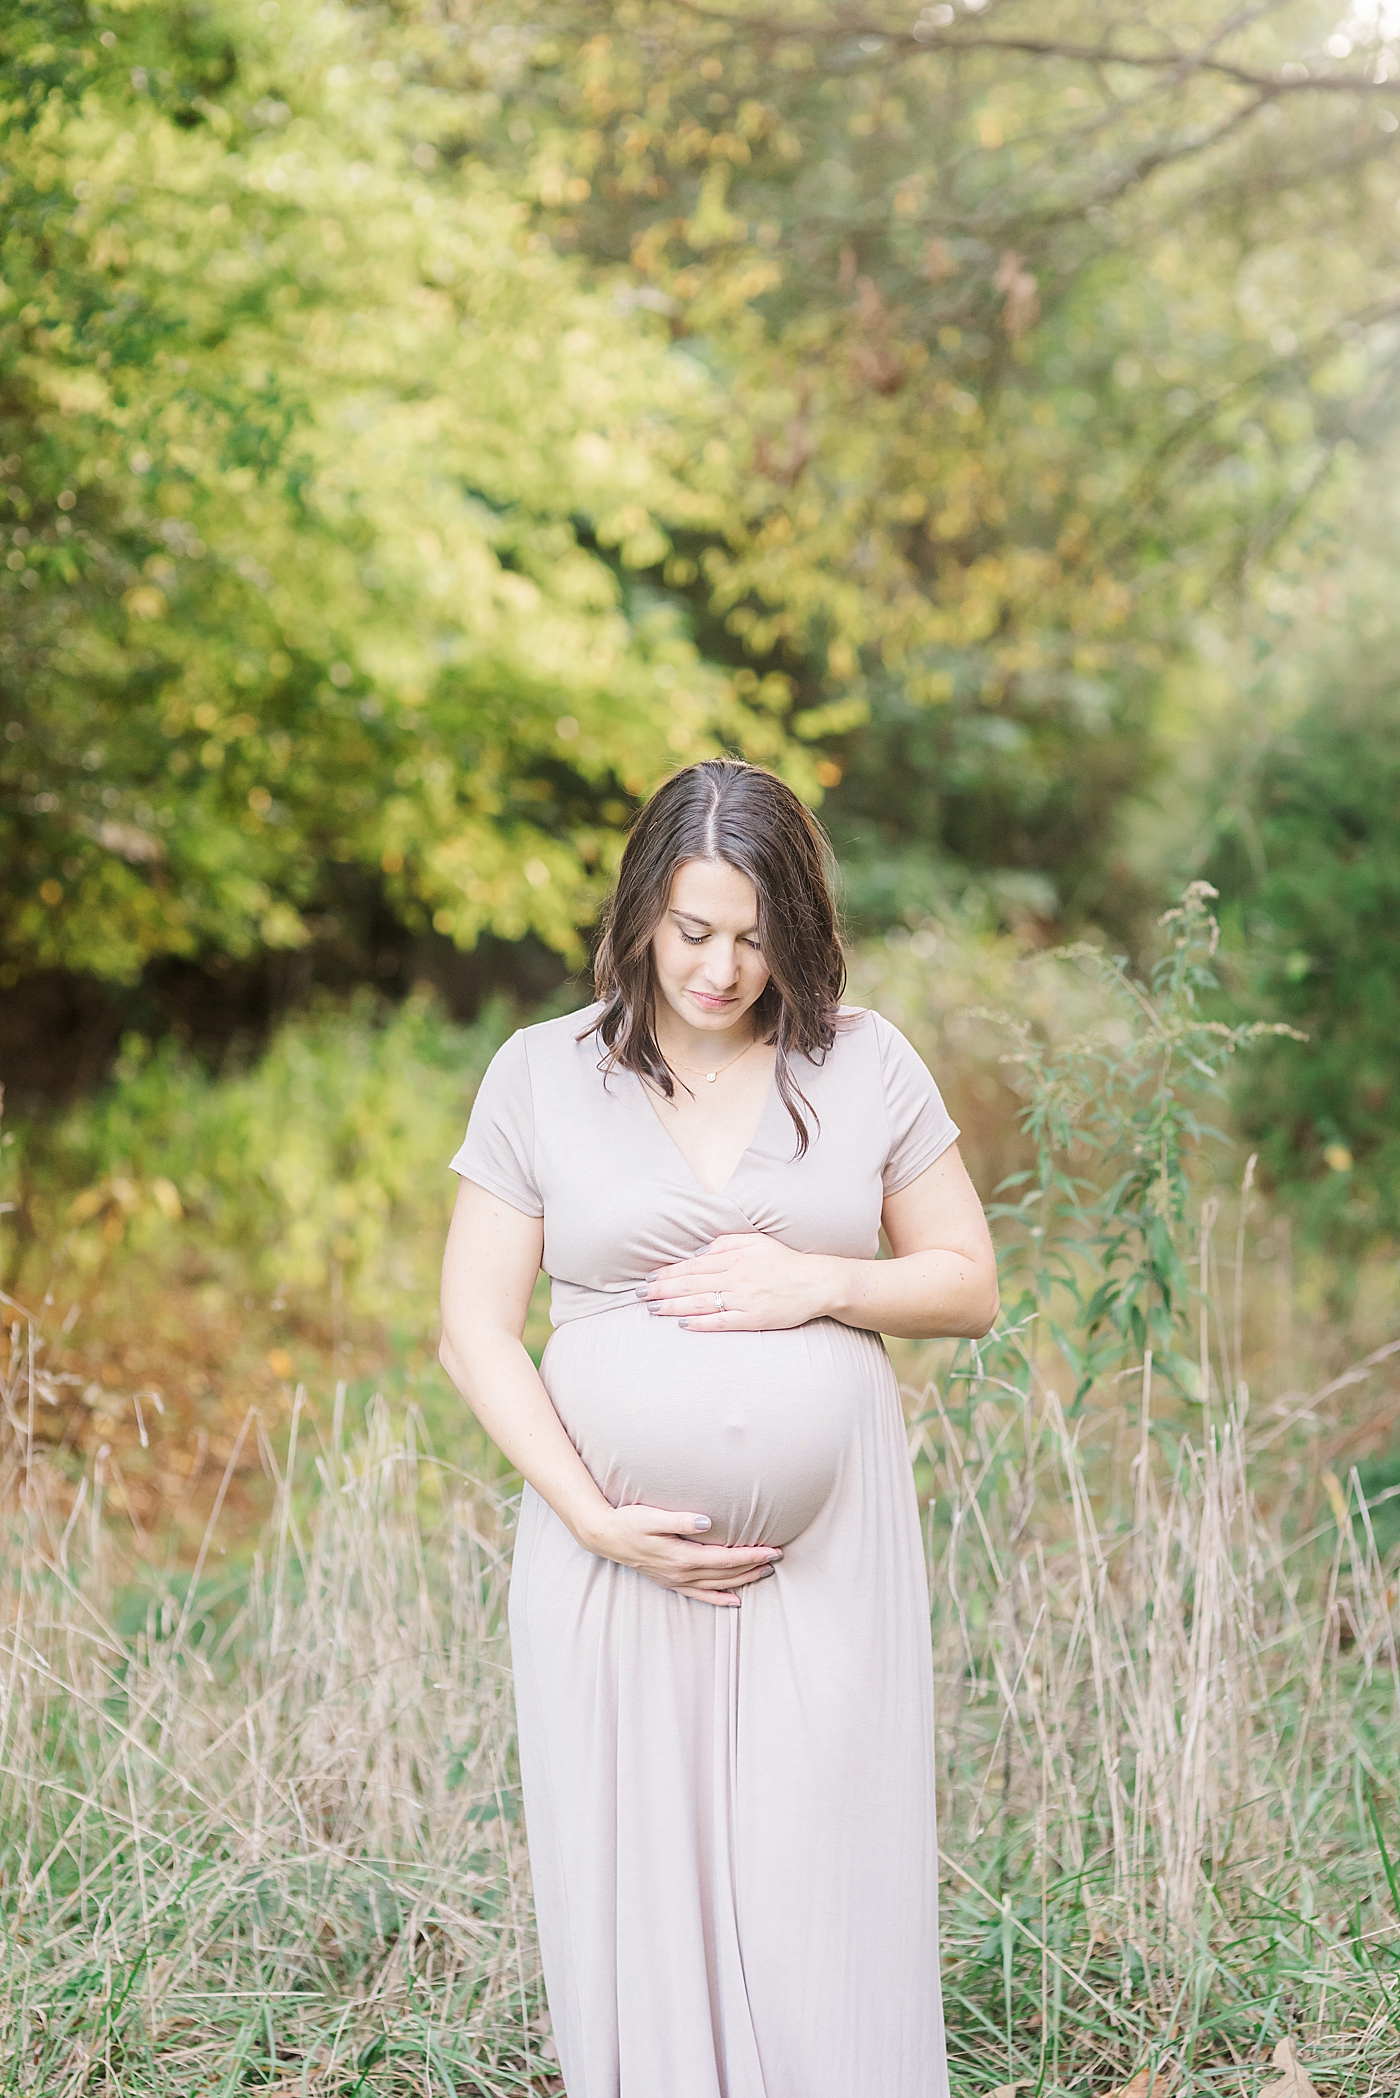 Mom to be admiring her belly | Photo by Davidson Maternity Photographer Anna Wisjo